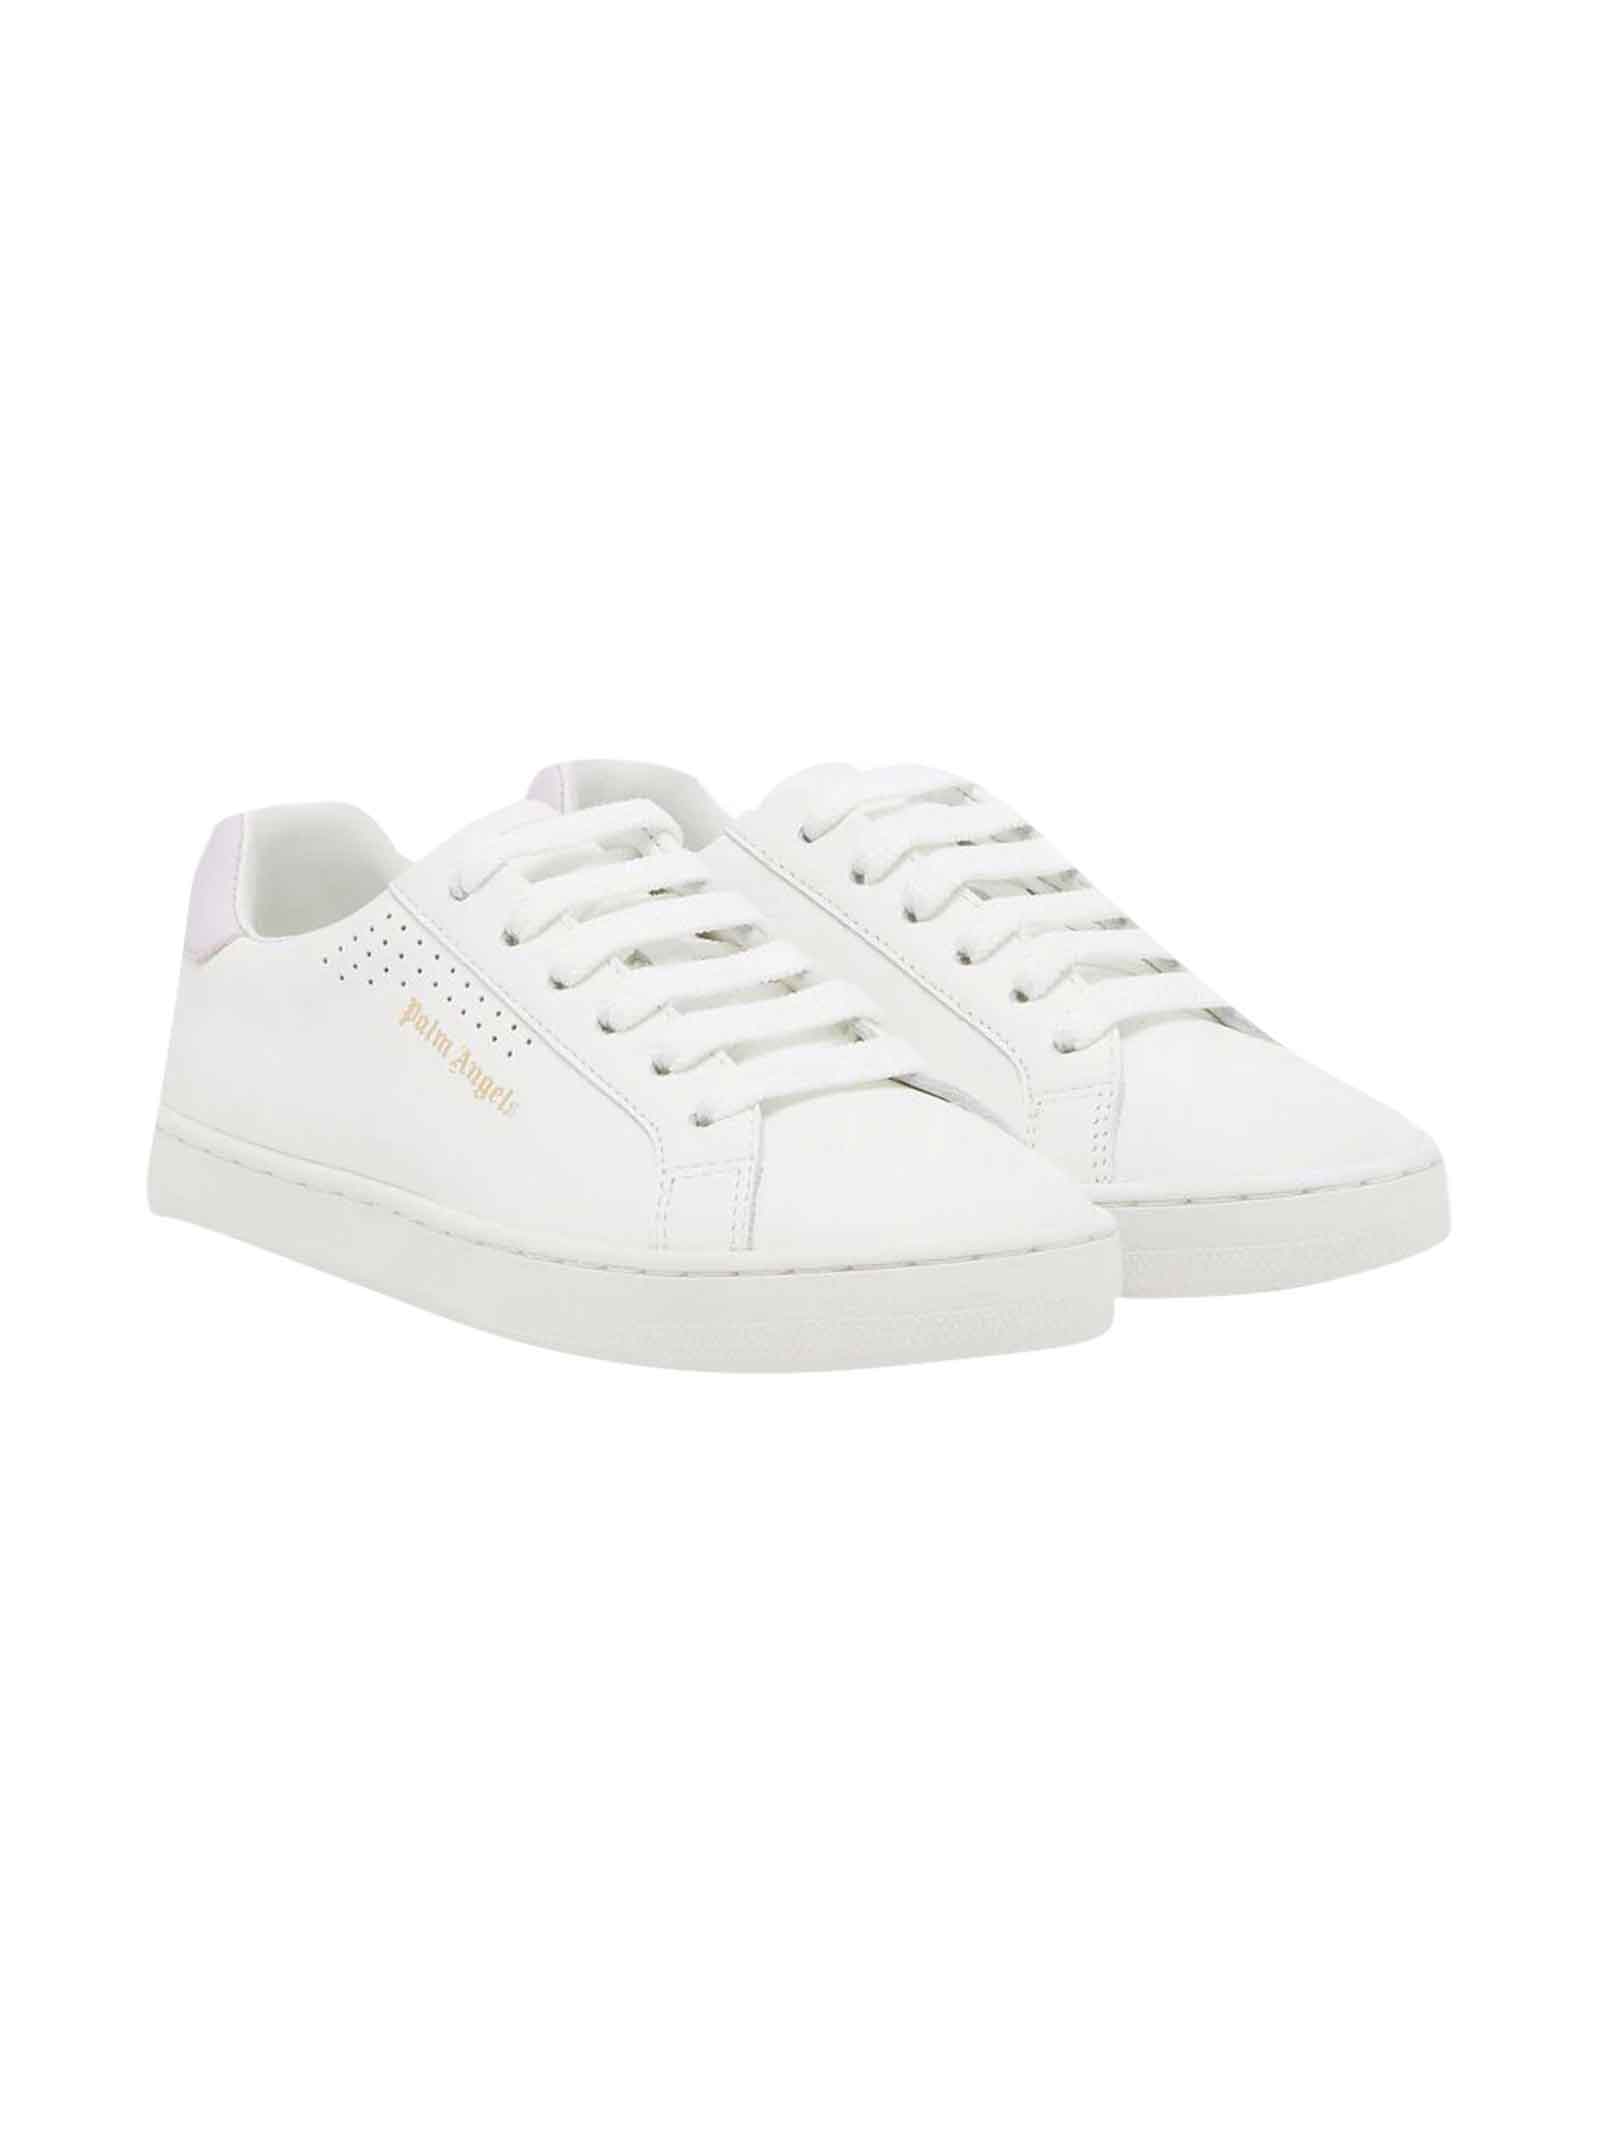 Palm Angels White Shoes Girl